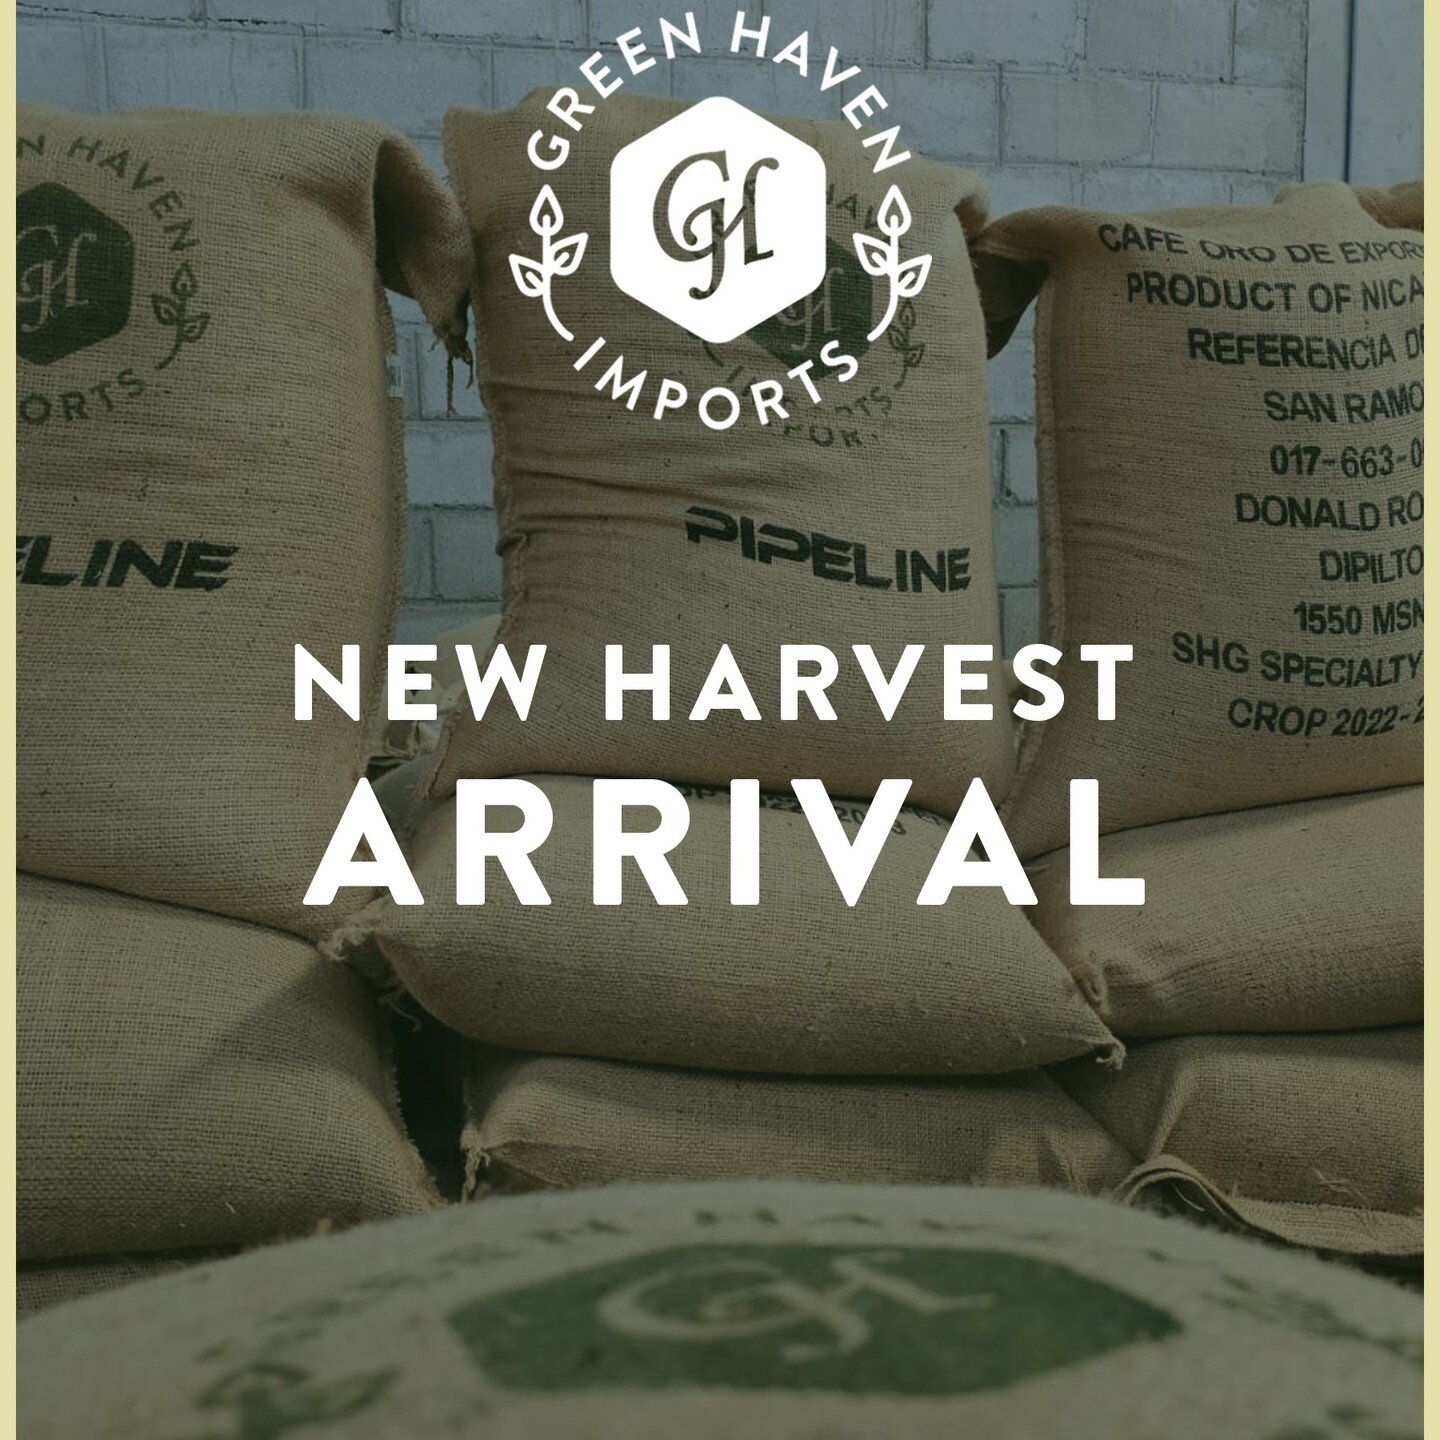 🌟 Discover the arrival of the 2023 Nicaraguan Harvest! ✨

At Green Haven Imports, we're thrilled to present the arrival of our exquisite 2023 Nicaraguan harvest coffees. ☕️

As proud advocates of direct trade practices, we cultivate deep-rooted rela